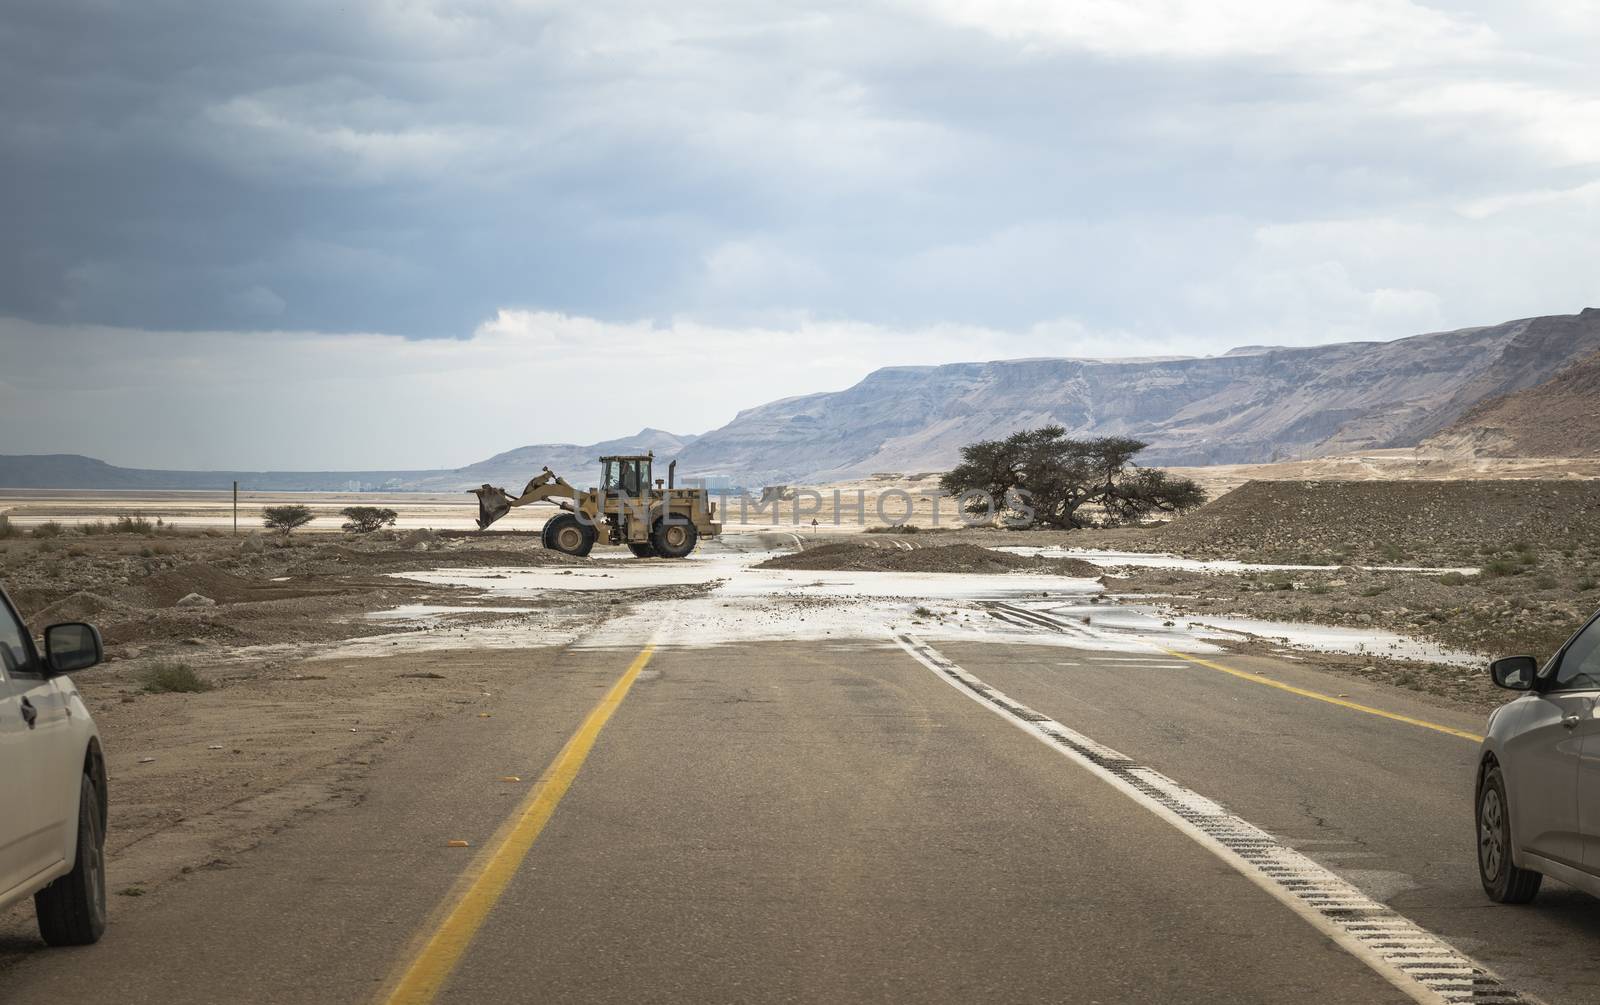 the main road 90 in Israel near Masada is blocked by floods and mud, the road goes from Eilat to jerusalem